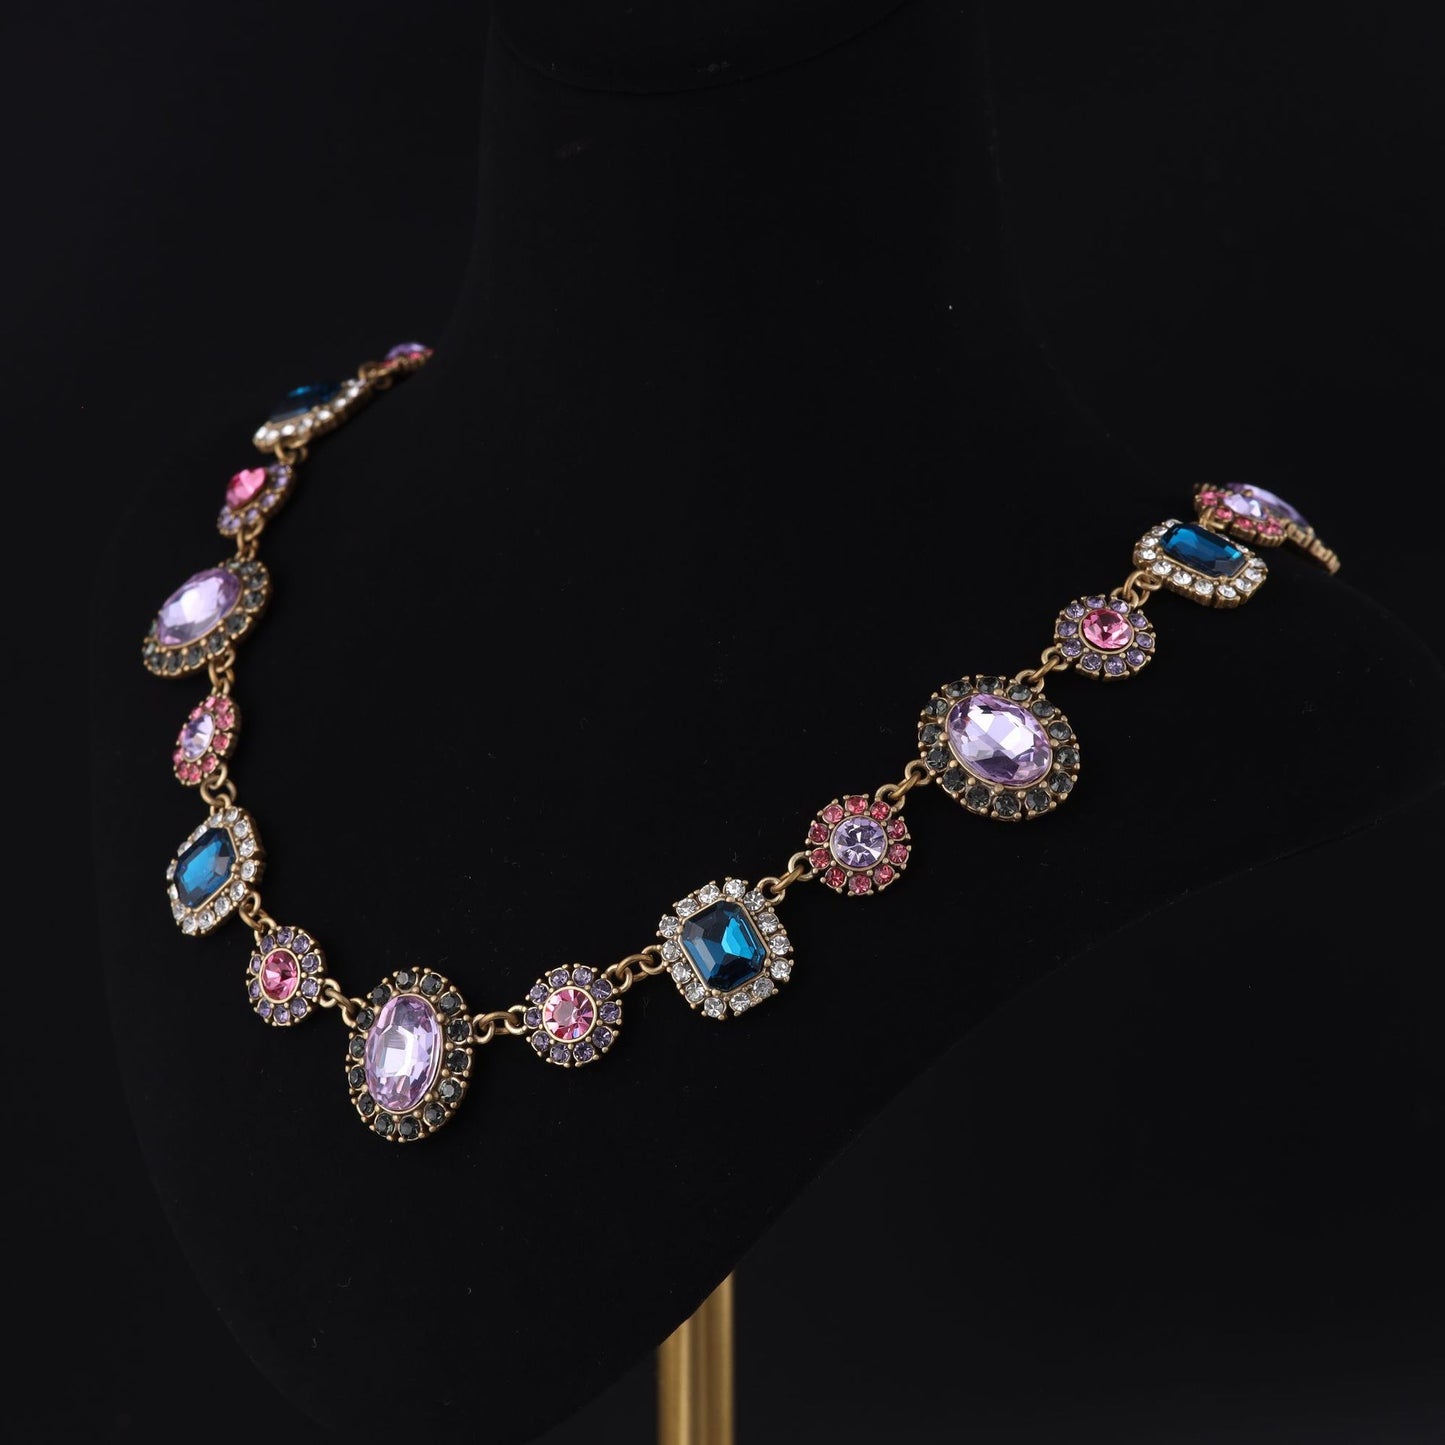 Vintage Baroque Necklace Colored Choker Jewelry Weddings Banquet Accessory Women's gift